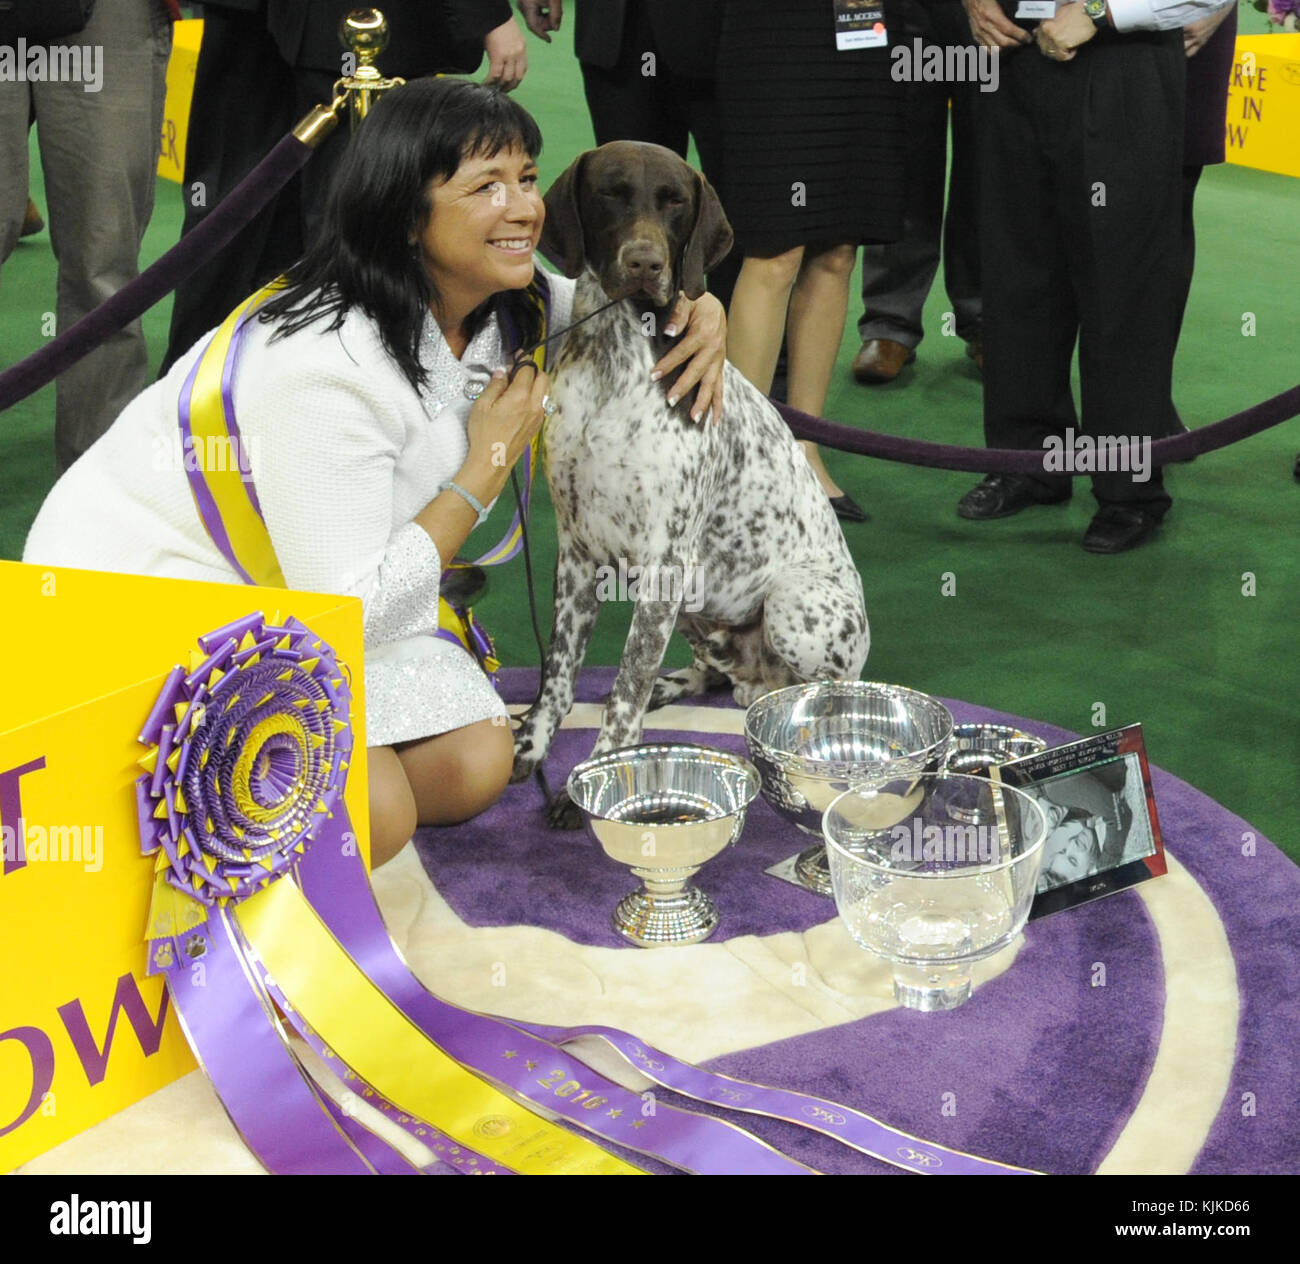 NEW YORK, NEW YORK - FEBRUARY 16: Handler Valerie Nunes-Atkinson and her dog CJ, a German Shorthaired Pointer, win Best in Show competition at the 140th Annual Westminster Kennel Club Dog Show at Madison Square Garden on February 16, 2016 in New York City  People:  Valerie Nunes-Atkinson, Cj Stock Photo